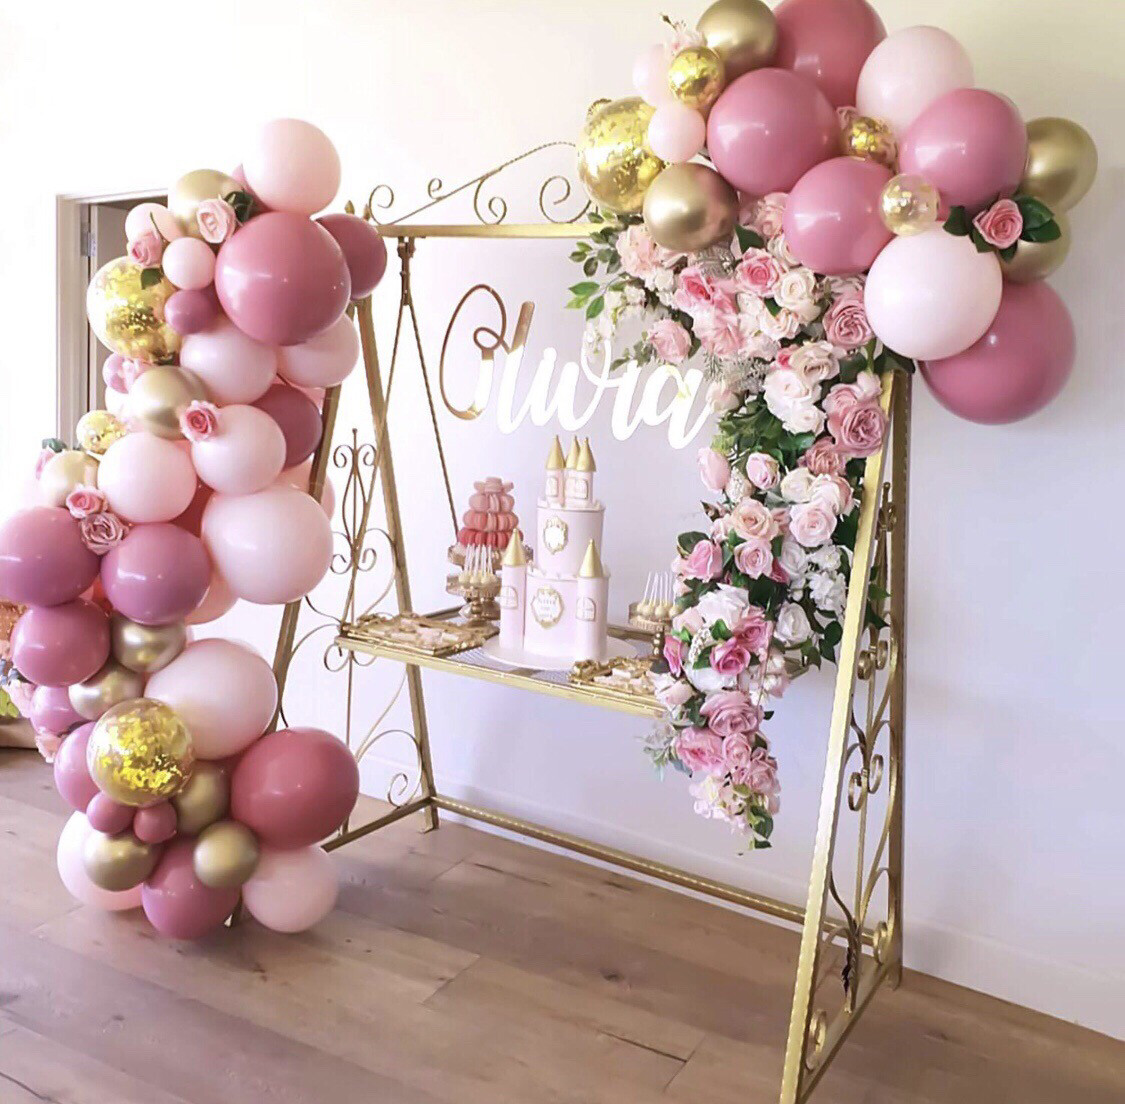 Pink and Gold Balloon Garland Set Pink Gold Balloons Birthday Party Wedding Party Balloons Decorations Baby Shower Decoration Party Supplies